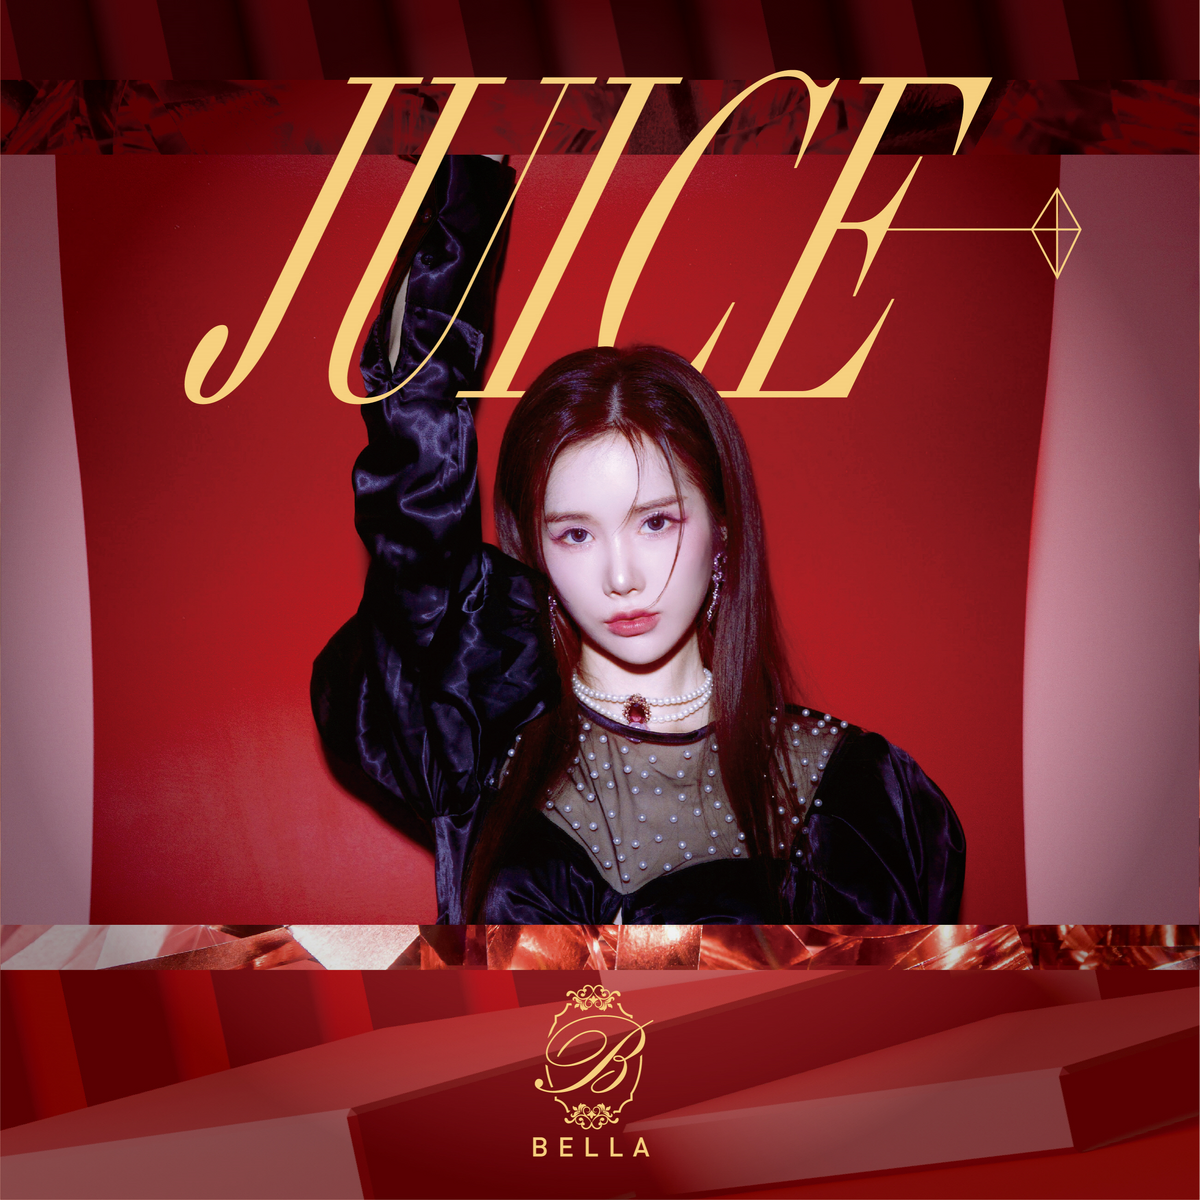 bella on X: update to the twice korean album covers template with